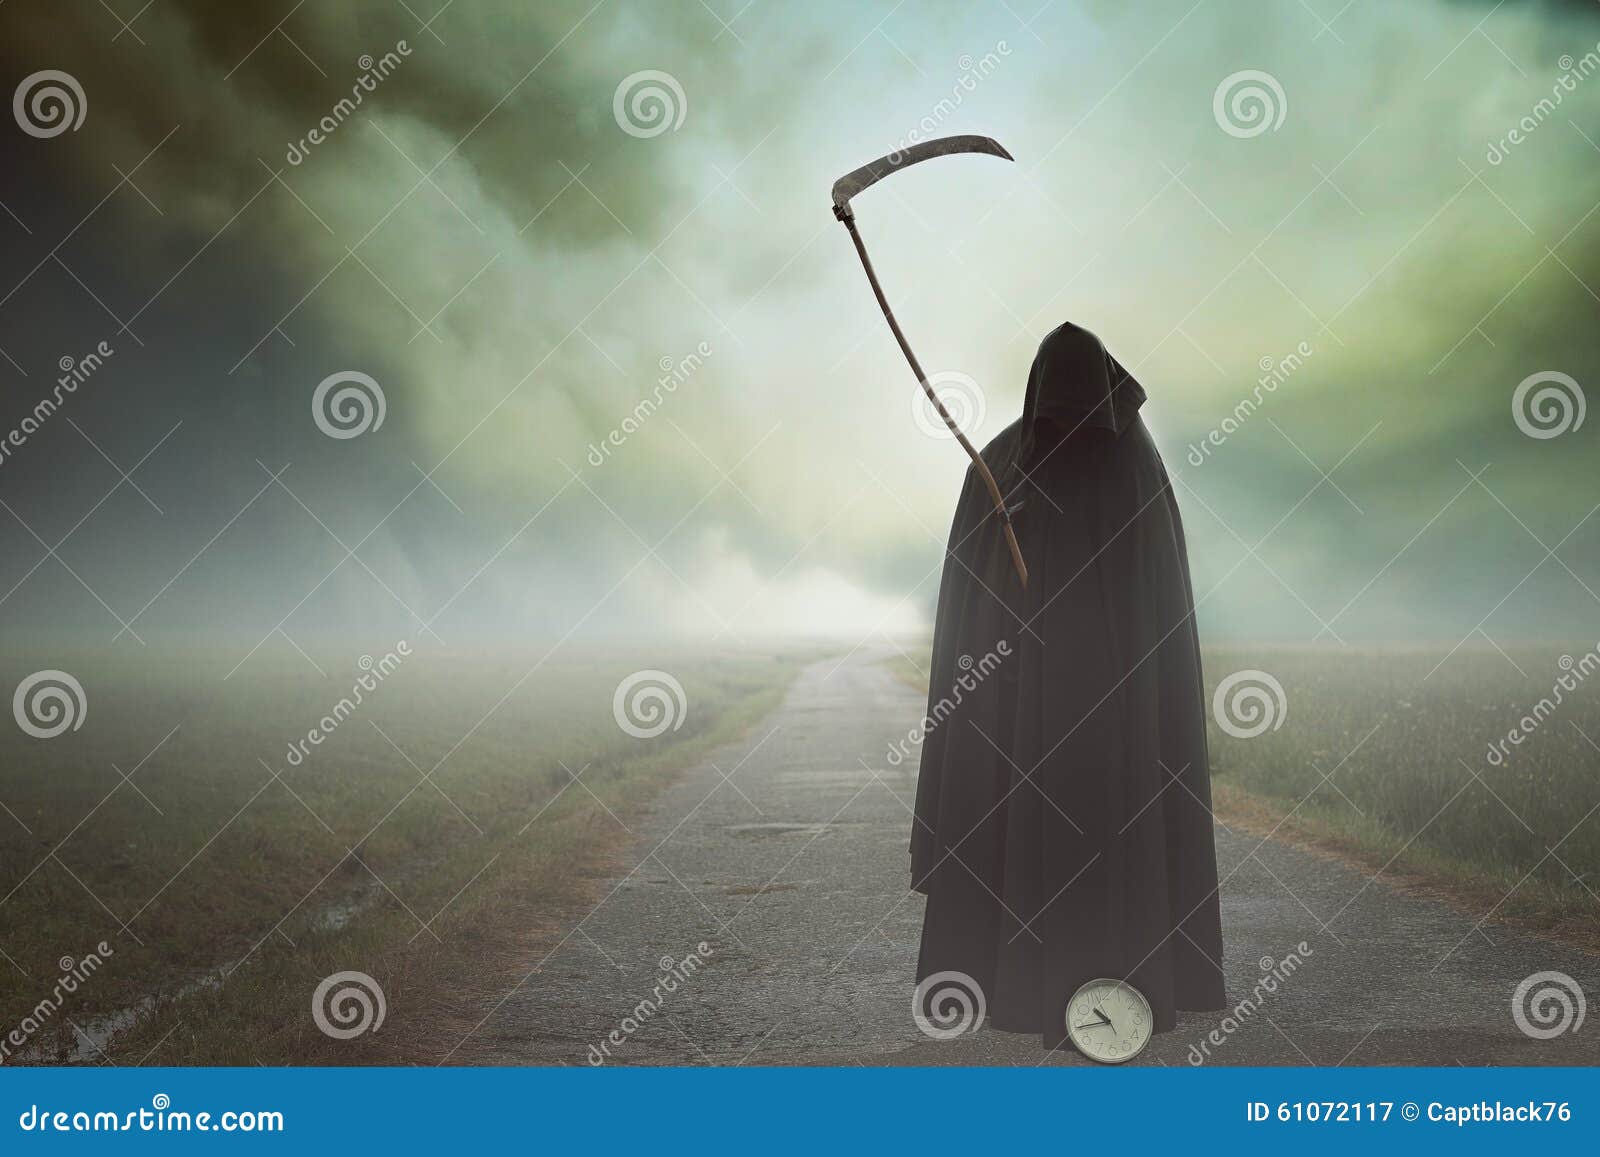 Death with Scythe in a Surreal Landscape Stock Image - Image of ...